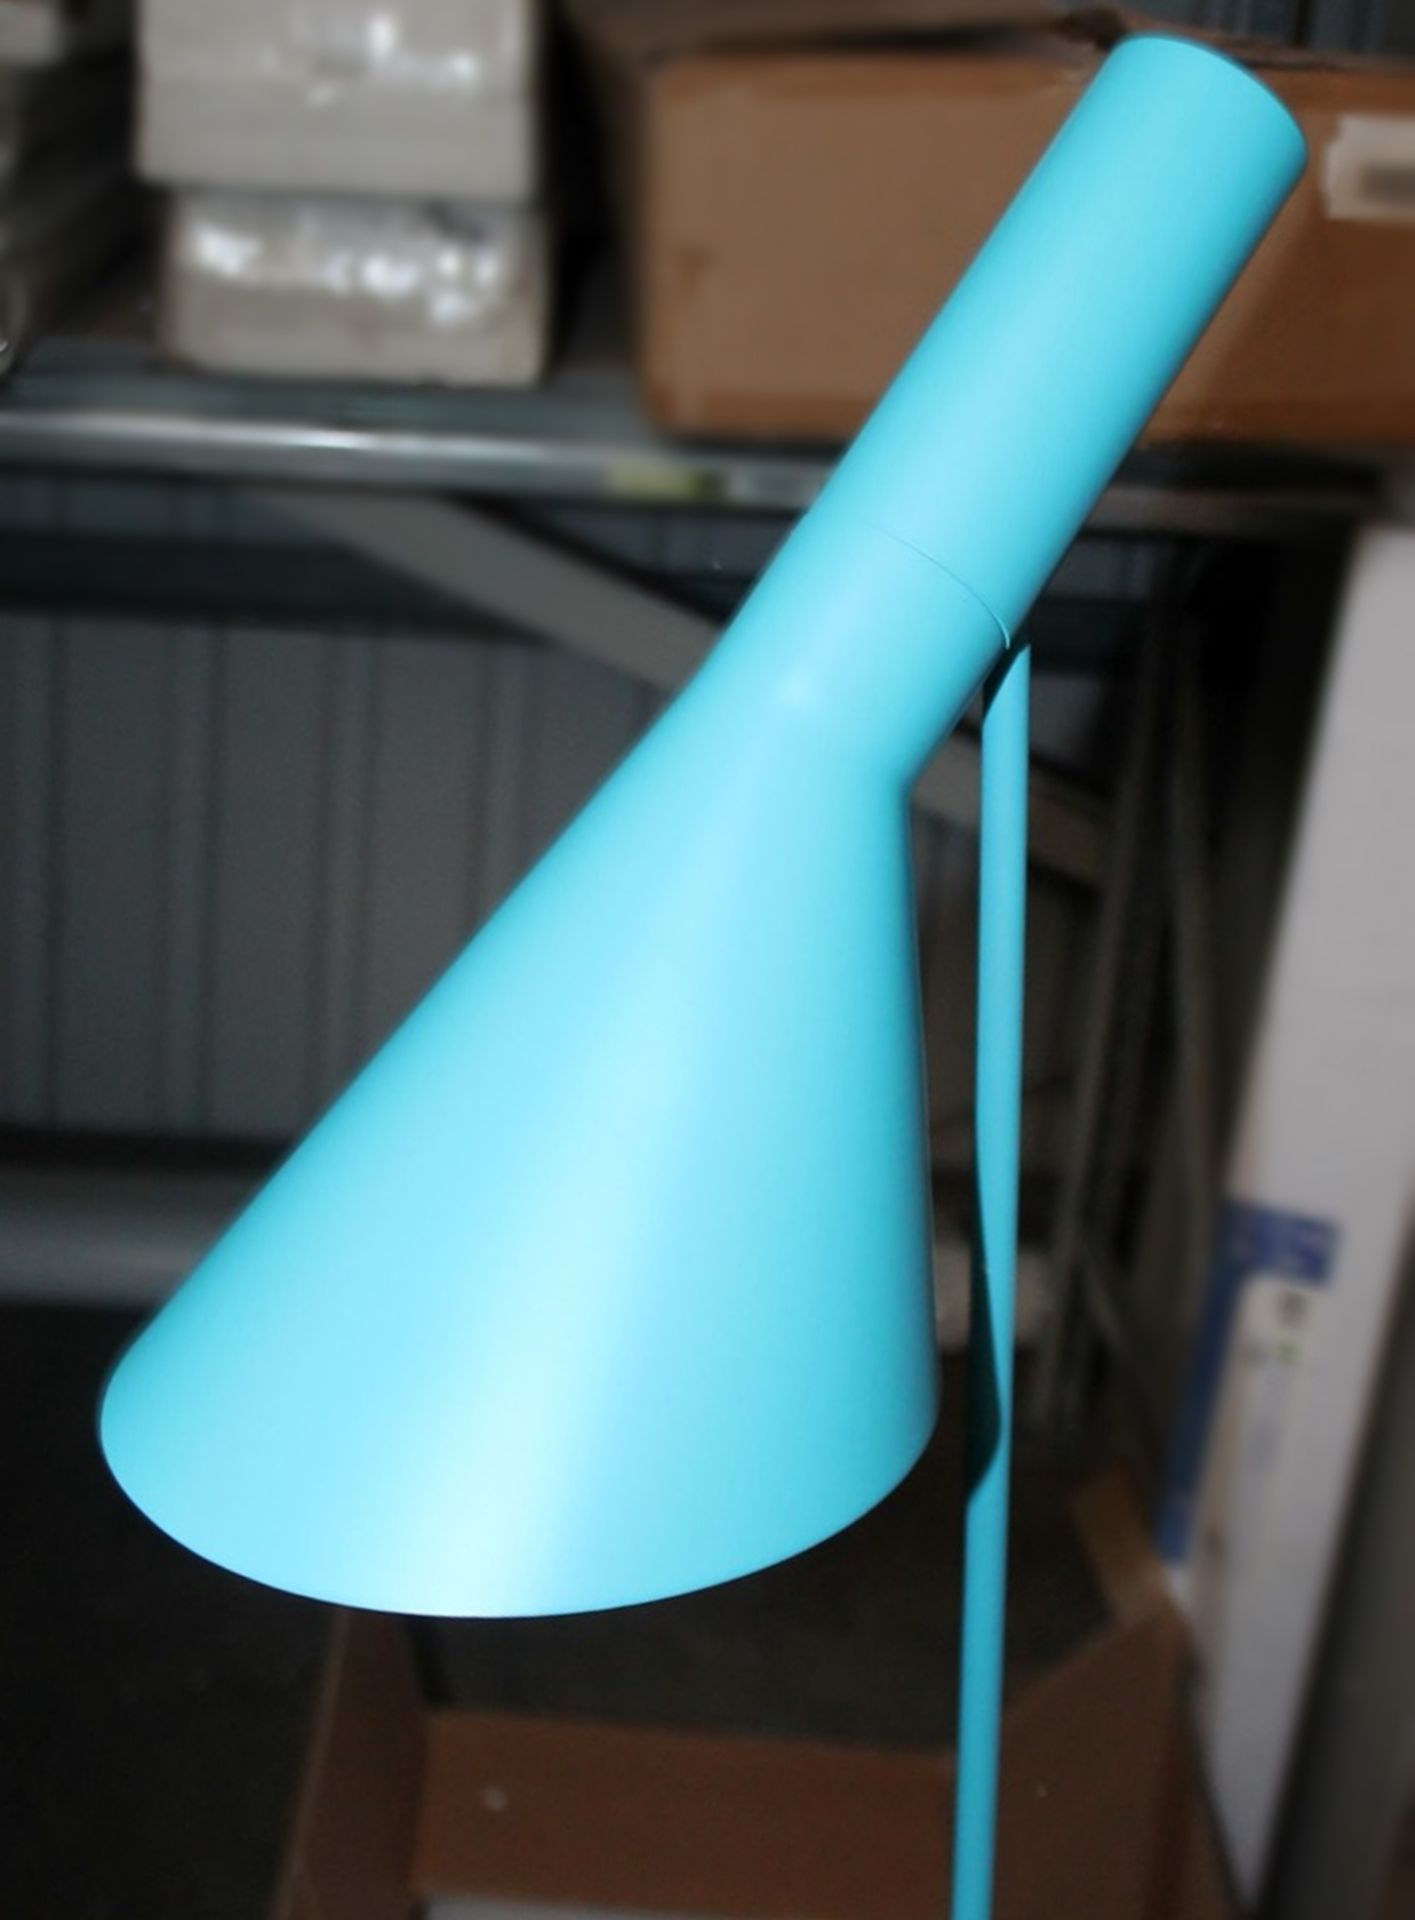 1 x Arn Jacobson Inspired Retro 60s-style Lamp In Bright Blue - New Boxed Stock - Bild 4 aus 7